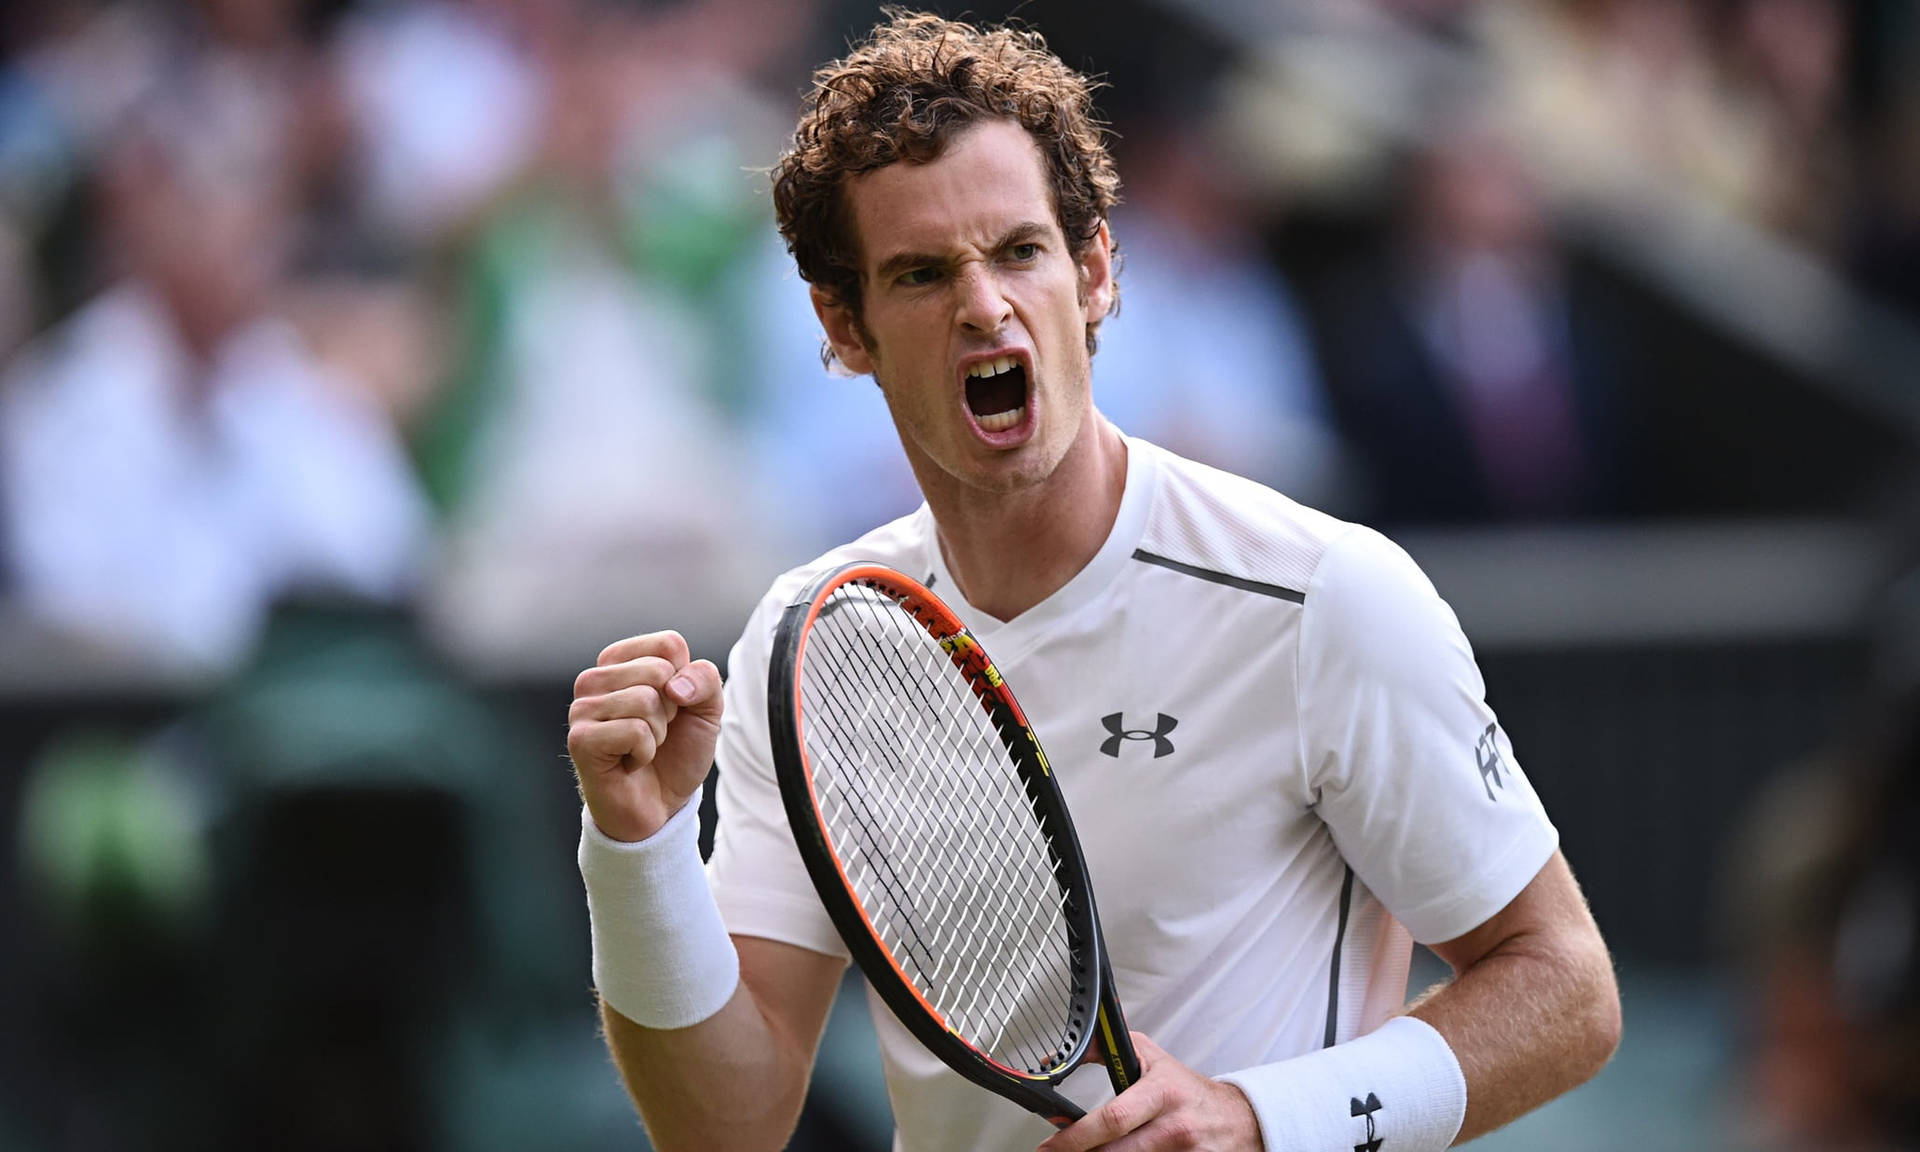 Andy Murray Passionately Celebrating A Victorious Moment Background